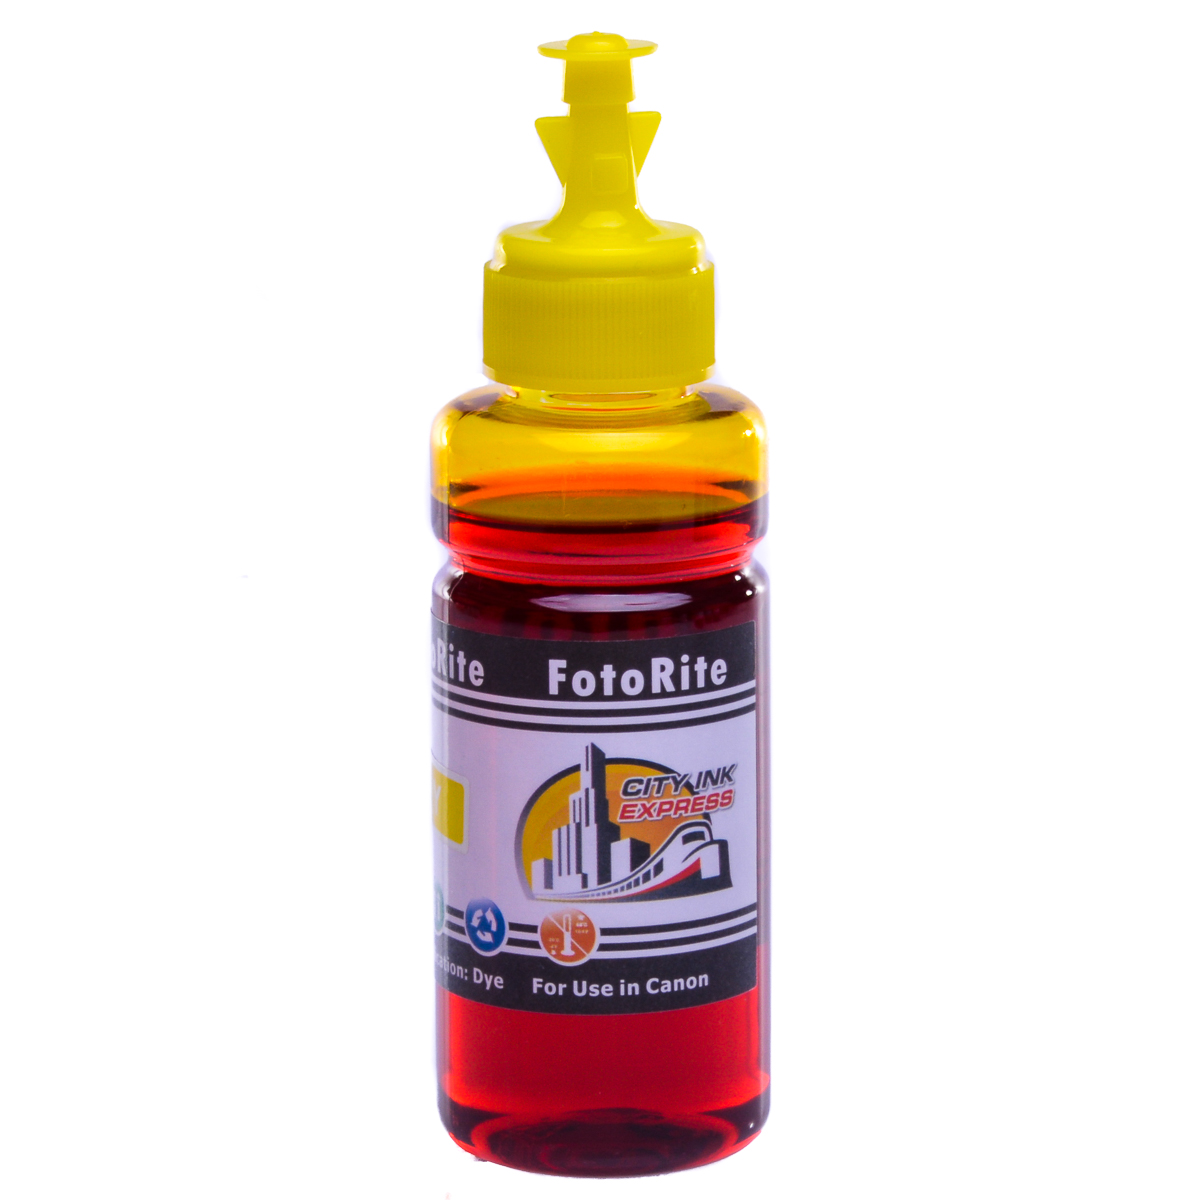 Cheap Yellow dye ink replaces Canon Pixma IP3600 - CLI-521Y